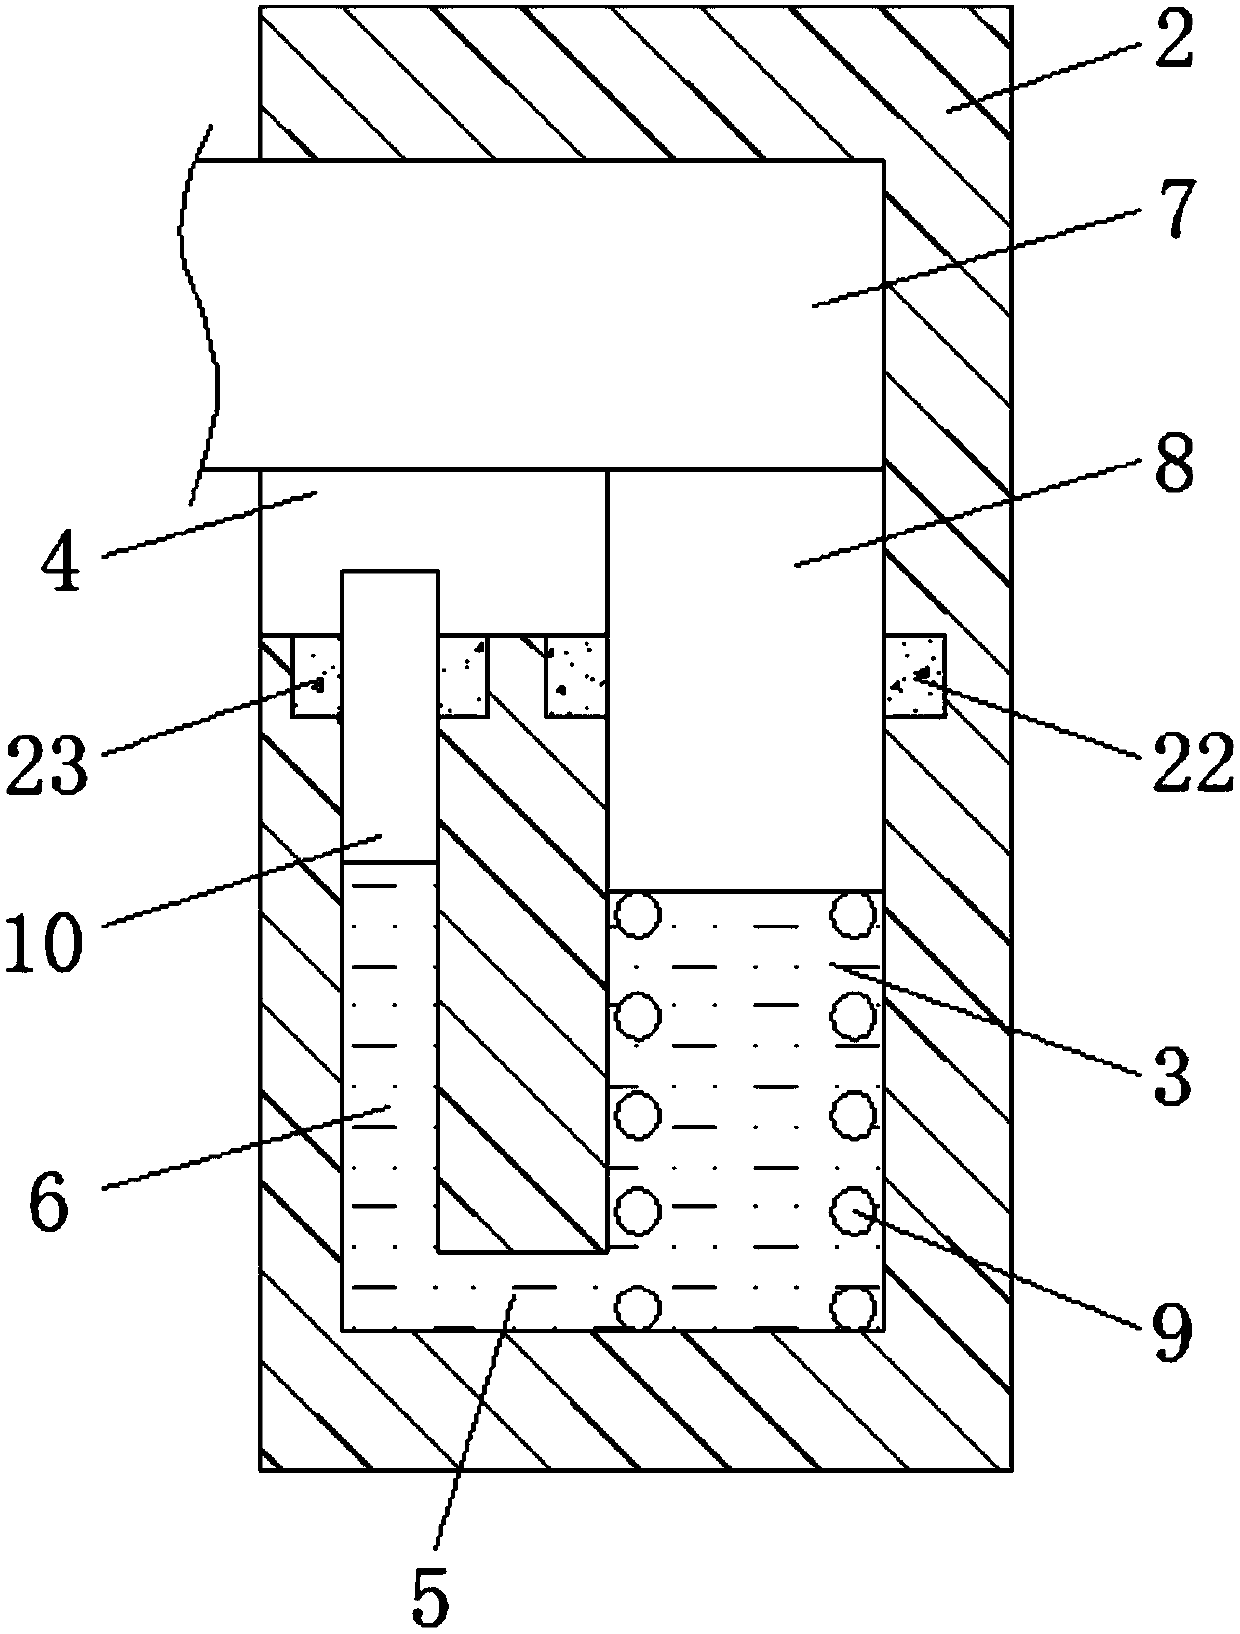 Anti-knock support having high stability performance